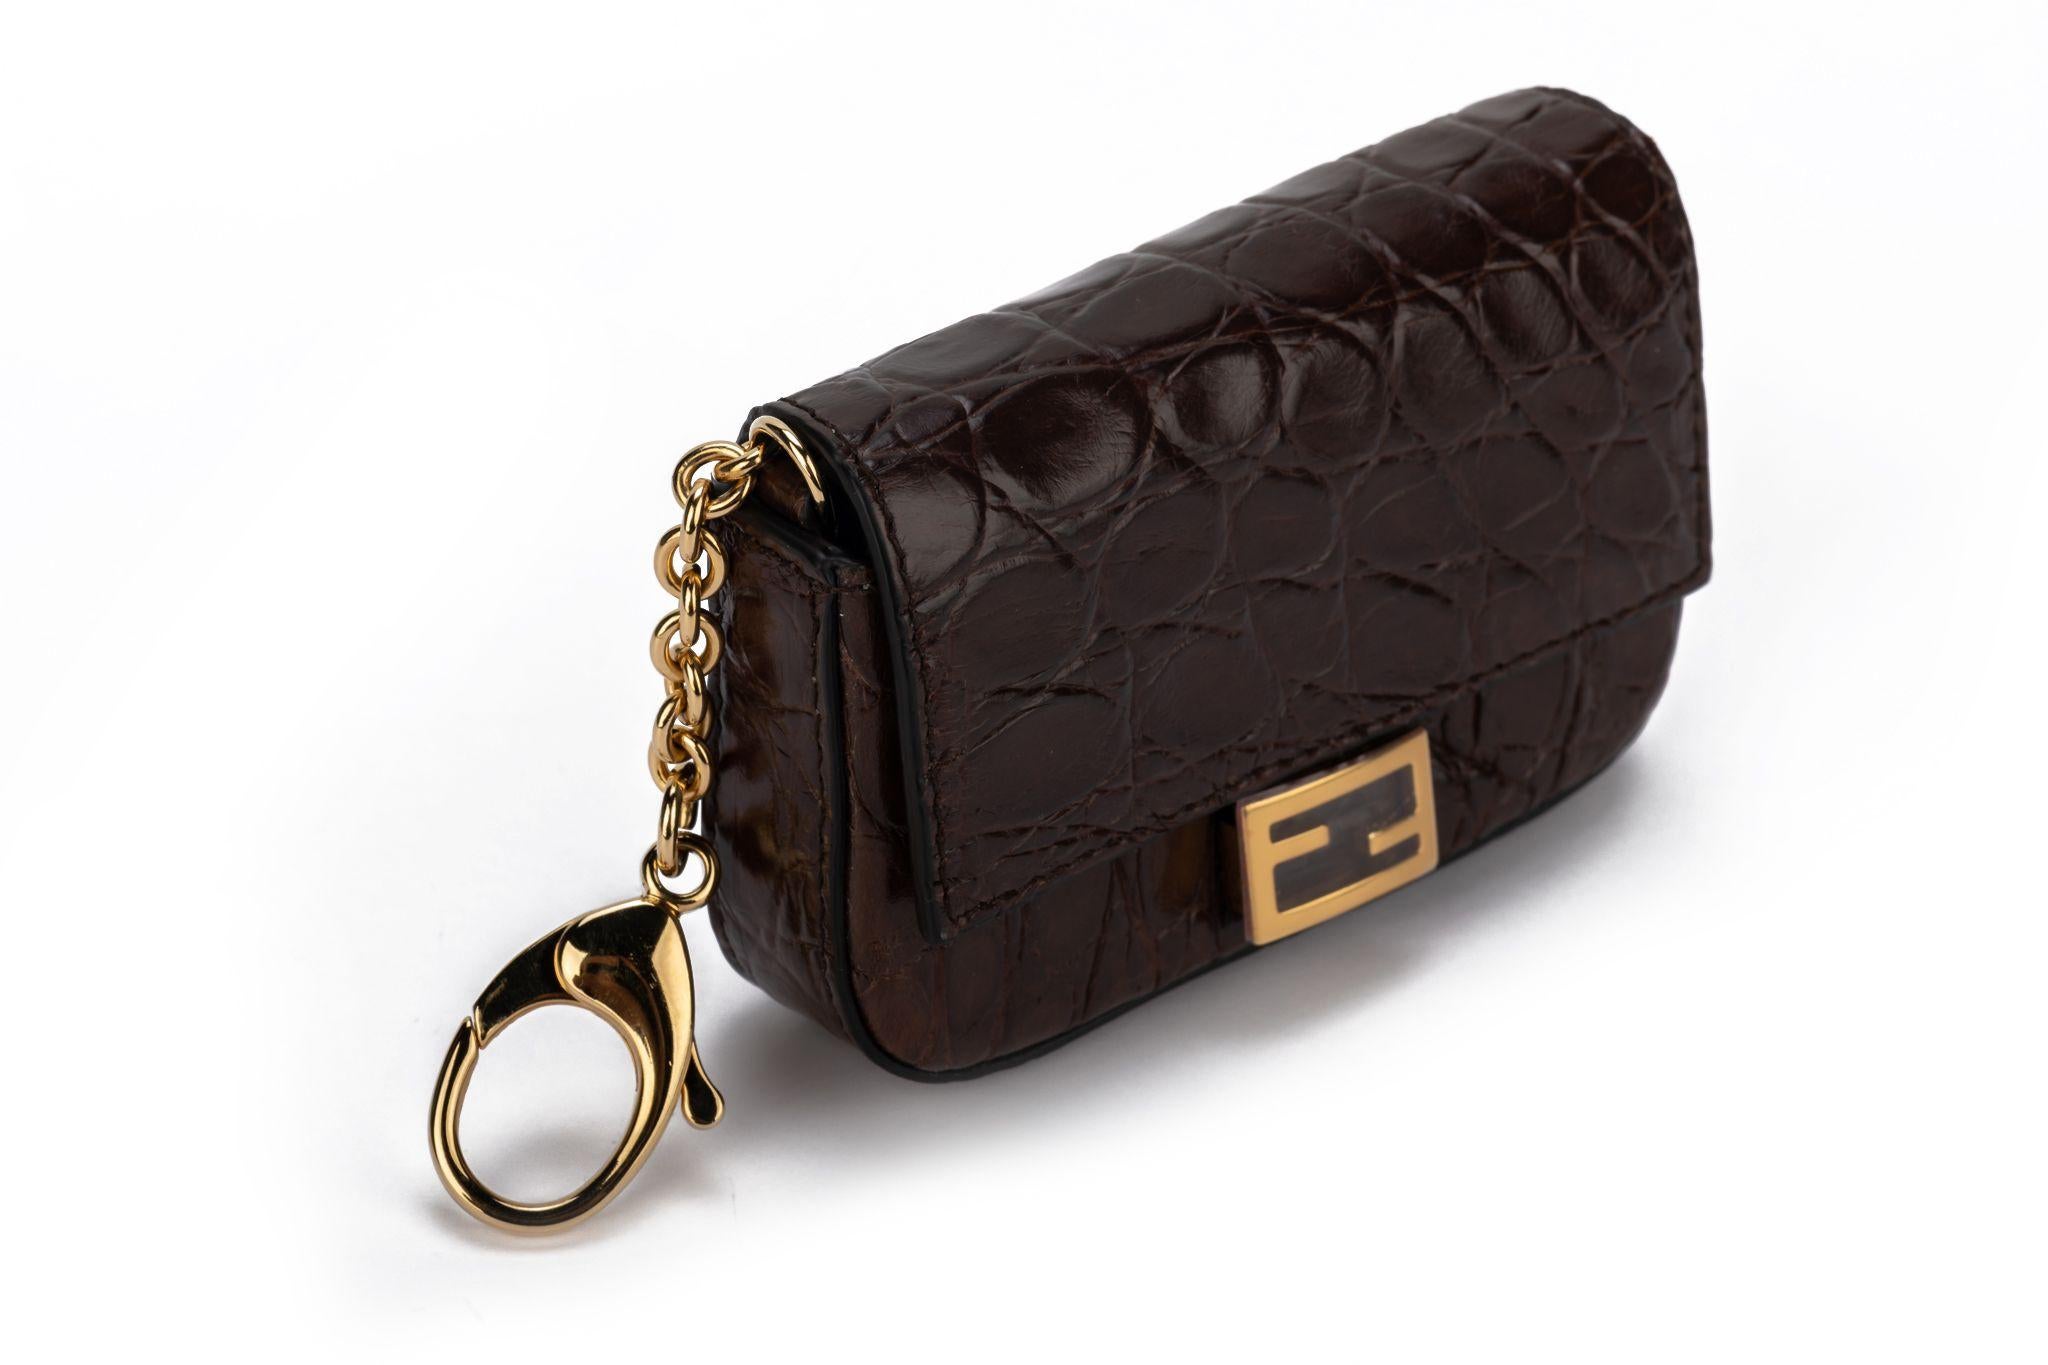 Fendi brown cayman nano baguette with gold tone hardware. 19,5 inches detachable shoulder strap. Can be worn as a charms also or a belt bag. Cites declaration included. Box, booklet and original dustcover.